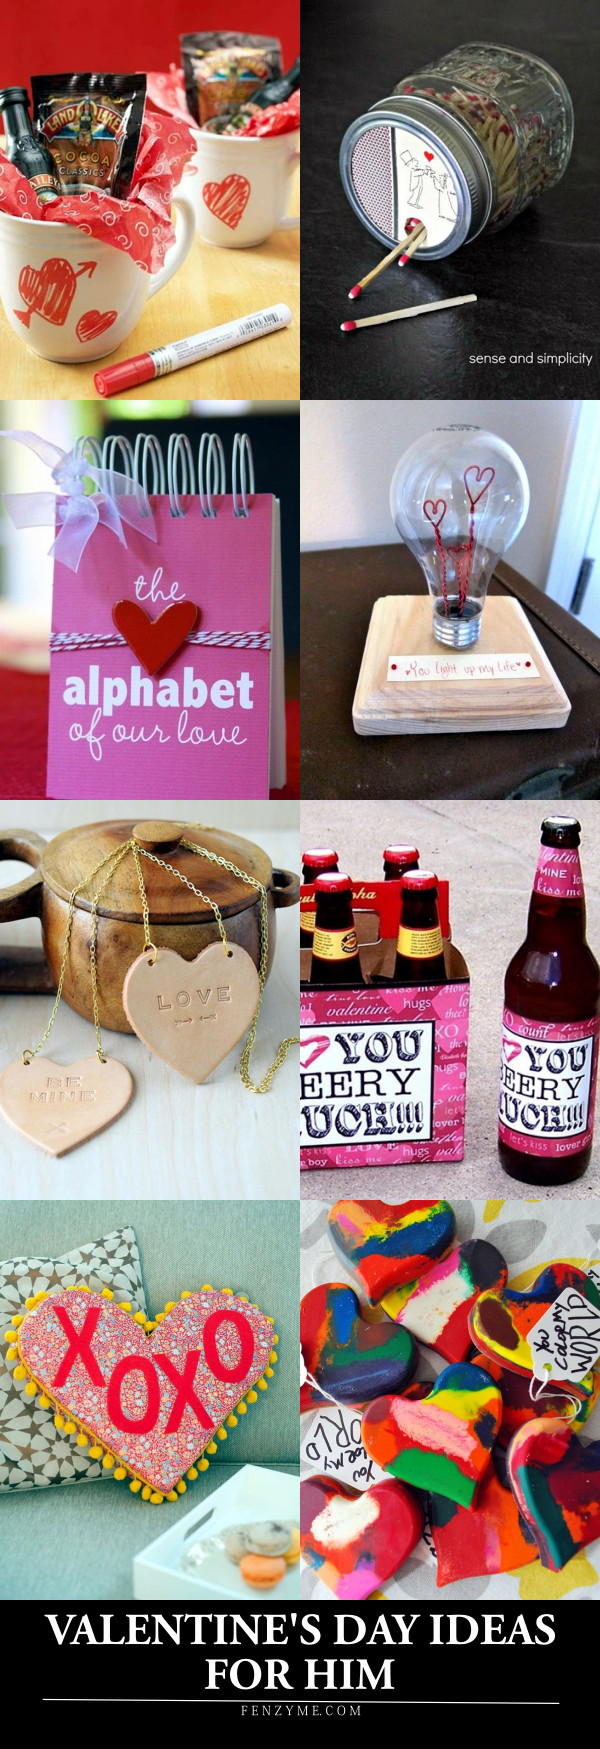 Ideas For Valentines Day For Him
 101 Homemade Valentines Day Ideas for Him that re really CUTE